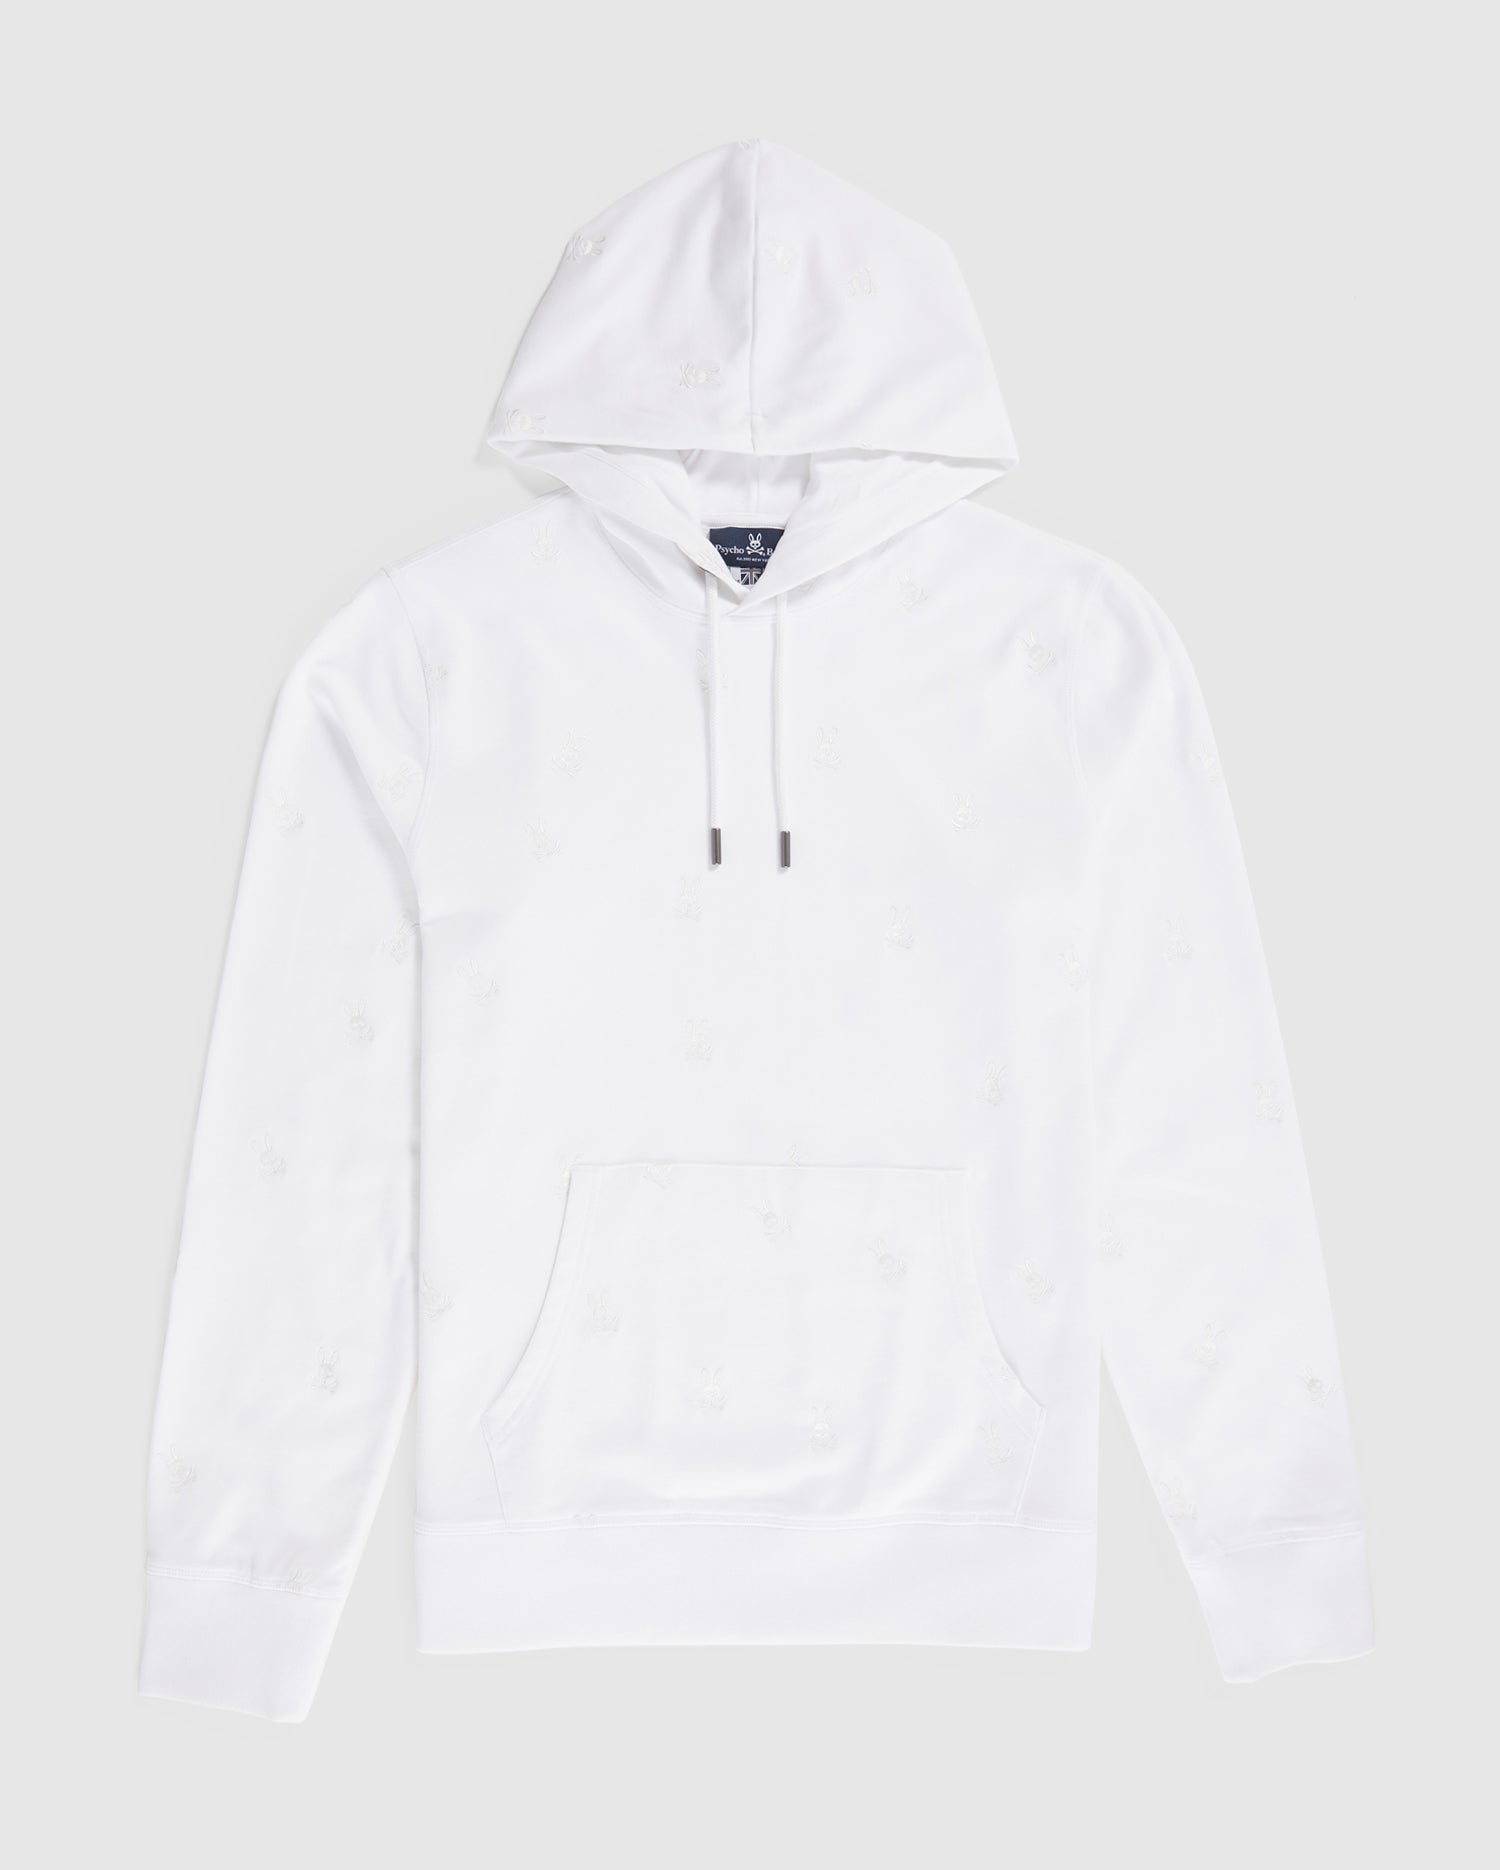 EMBROIDERED BUNNY | POPOVER MENS PSYCHO WHITE WOAD HOODIE